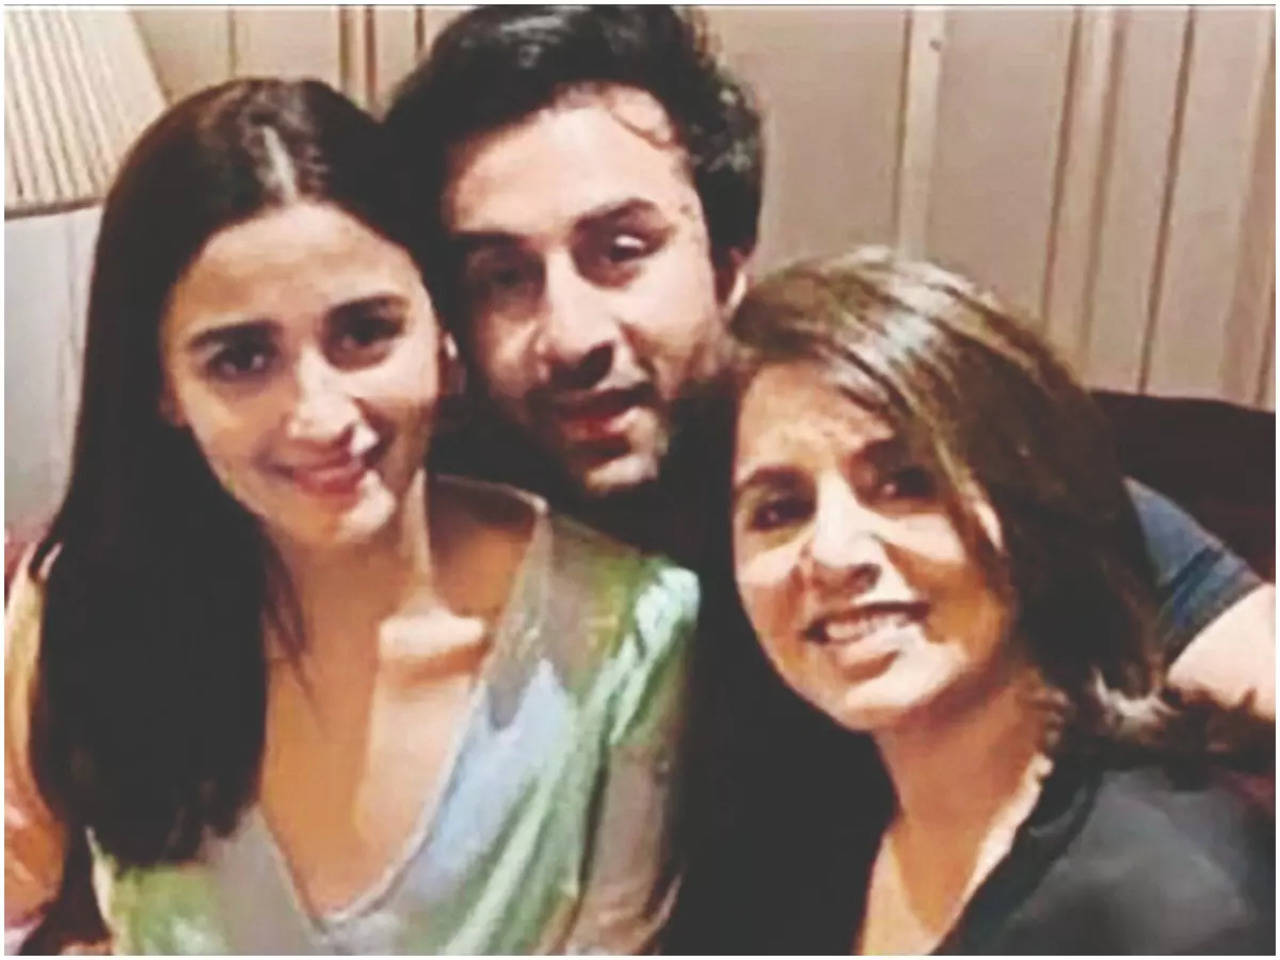 A change of heart for Ranbir Kapoor?